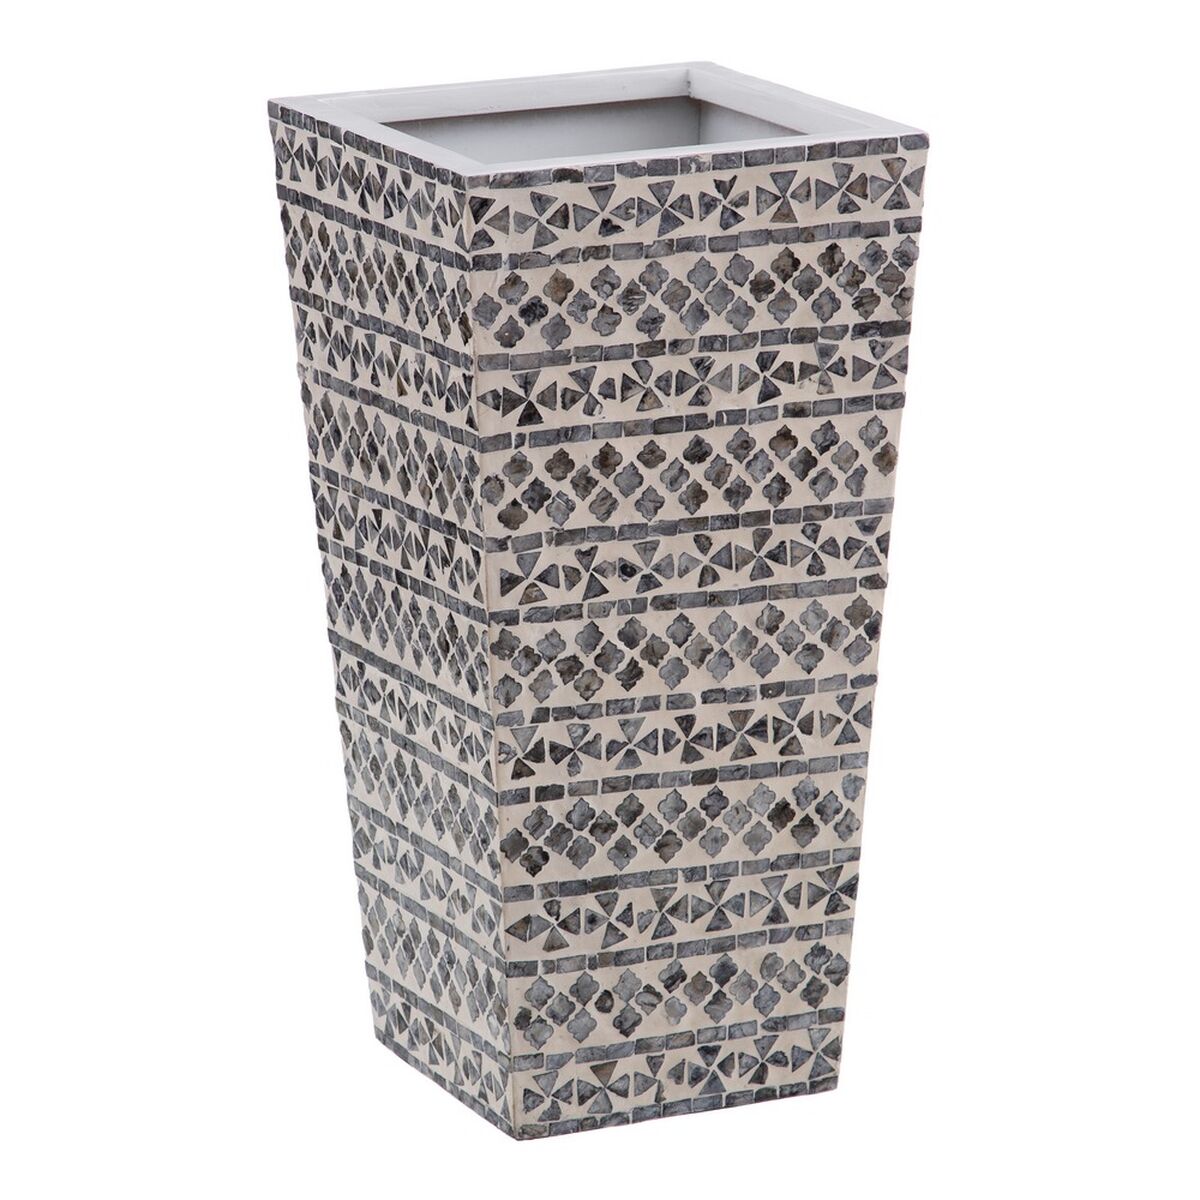 Planter 31 x 31 x 61 cm Grey White Mother of pearl